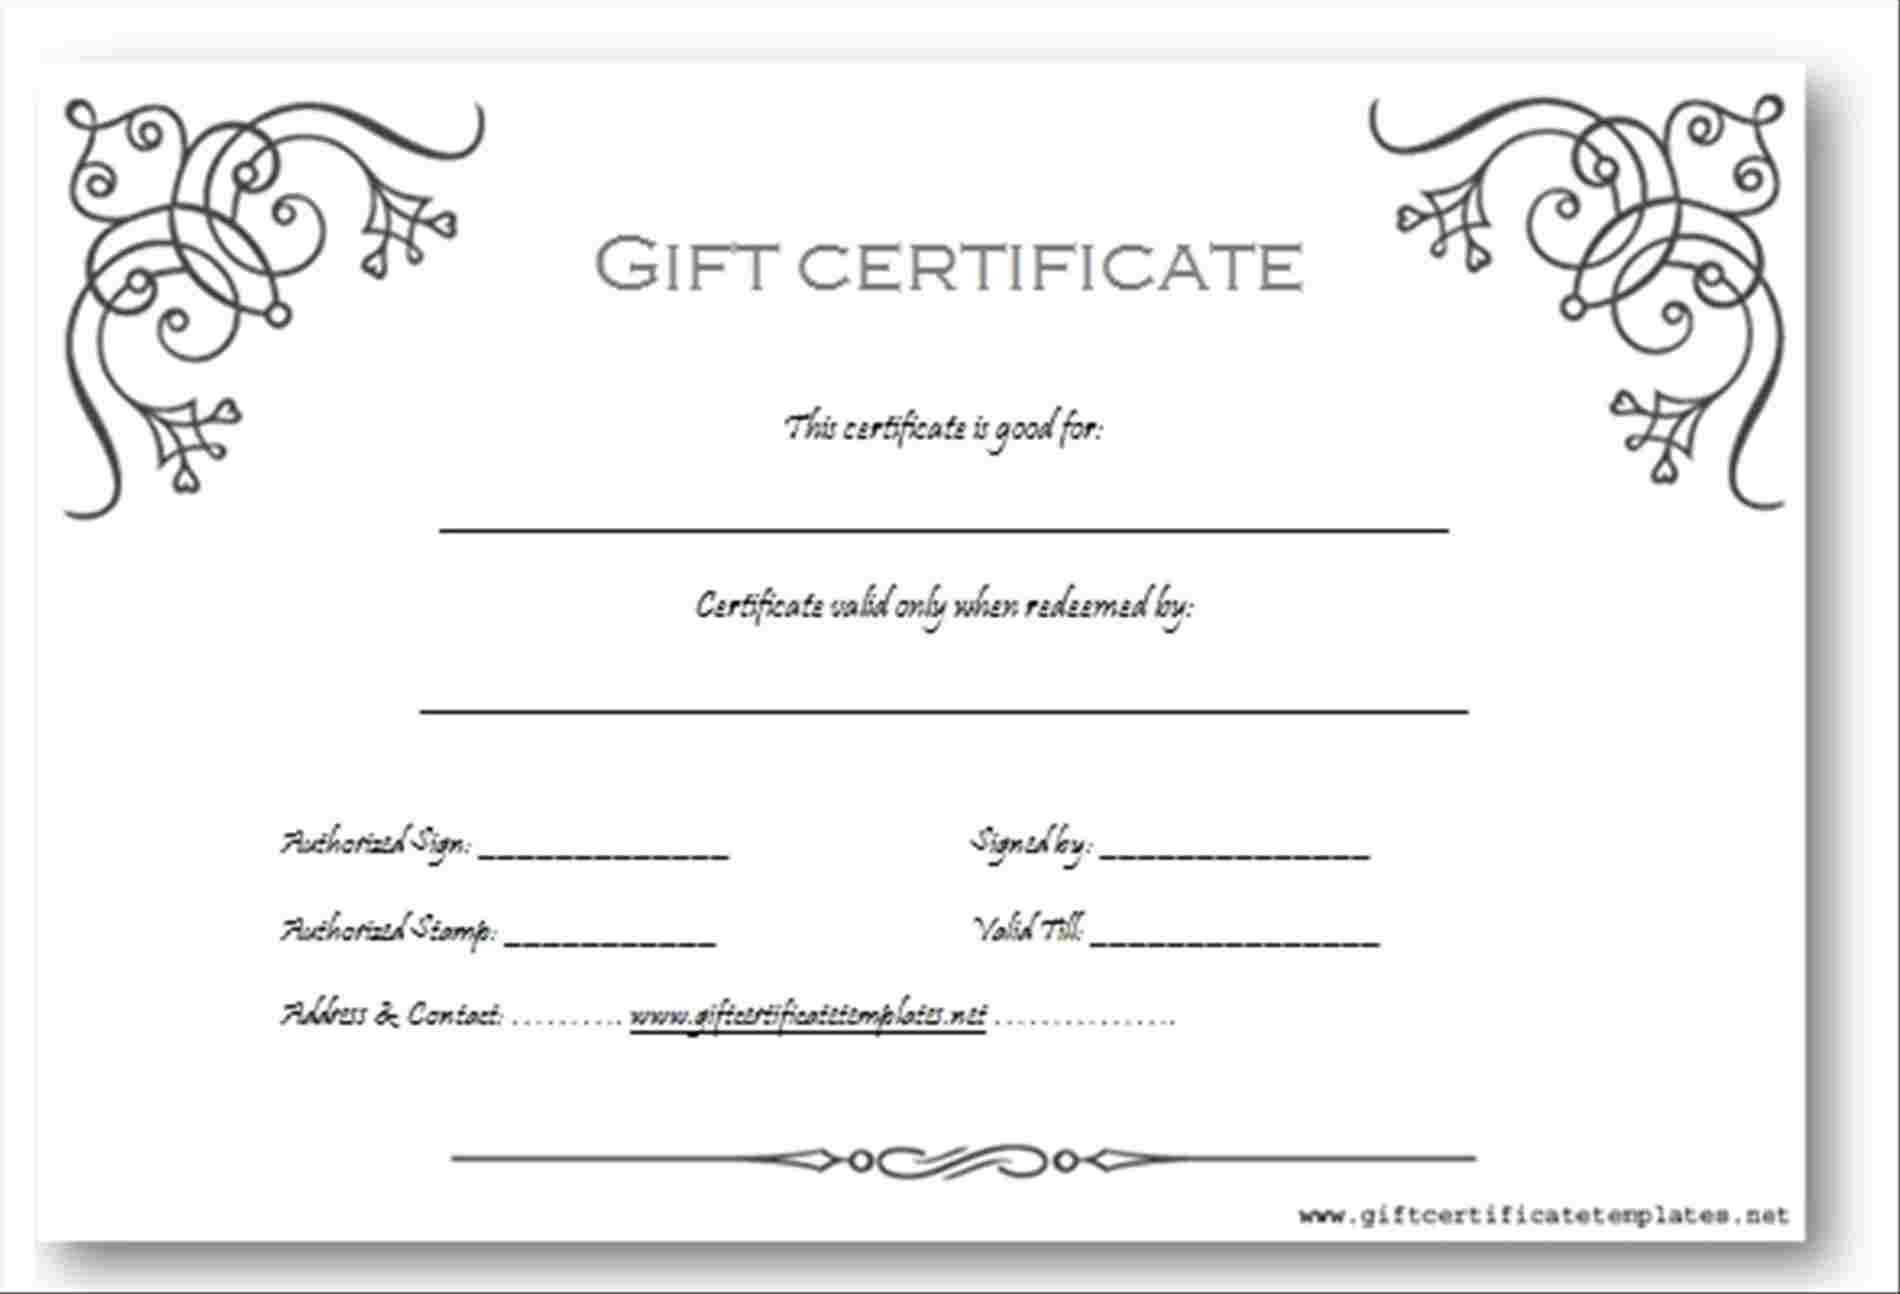 007 Photographer Gift Certificate Template Free Photography Pertaining To Free Photography Gift Certificate Template